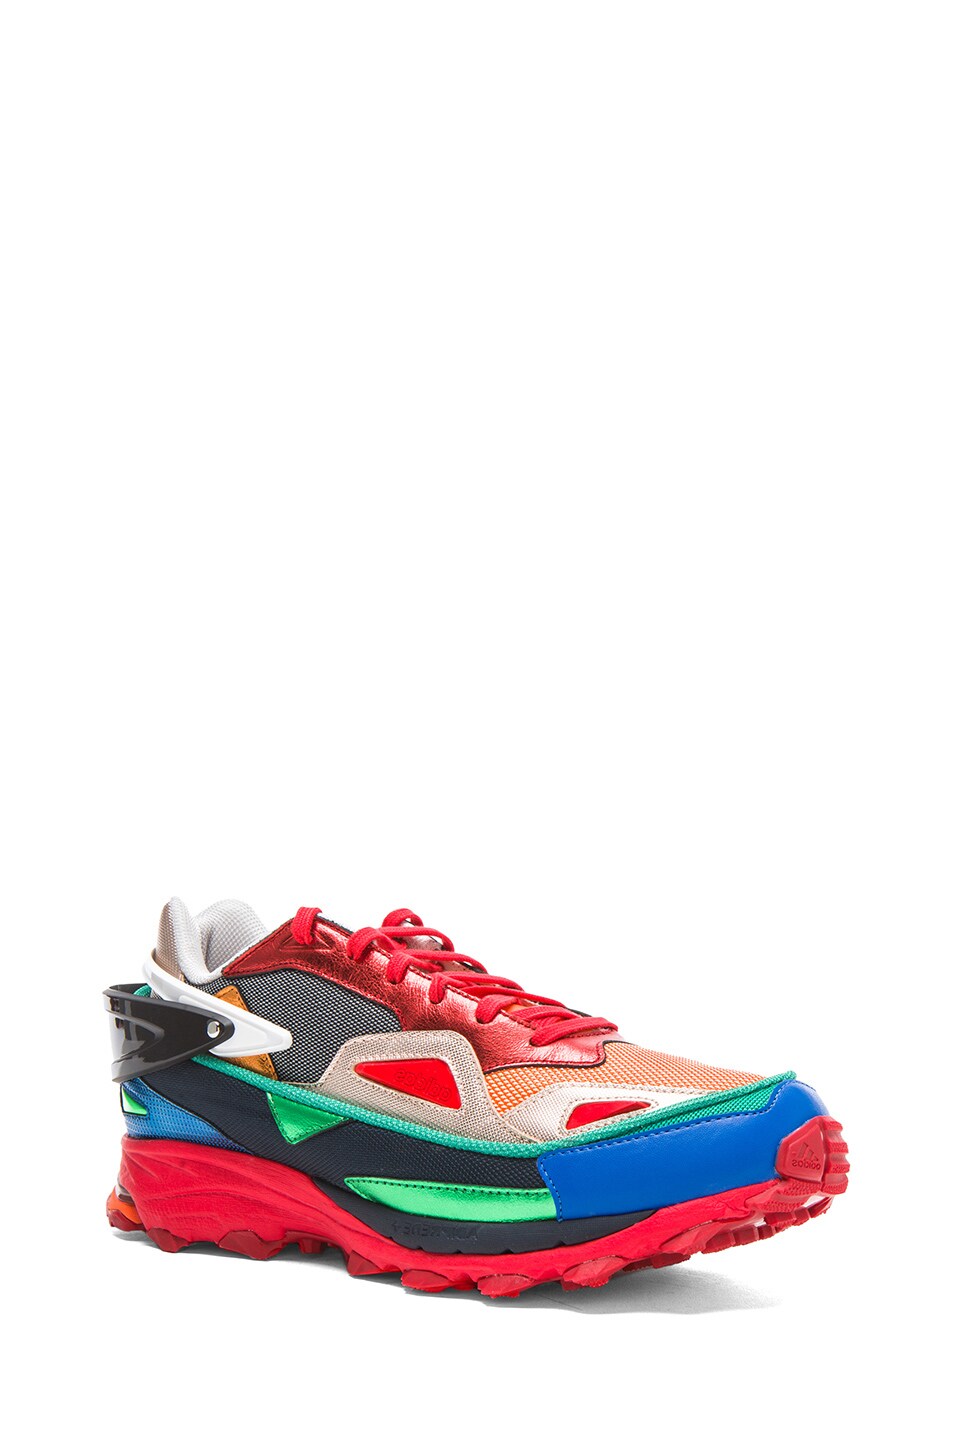 Image 1 of Raf Simons x Adidas Bounce Textile Sneakers in Orange, Red & Green